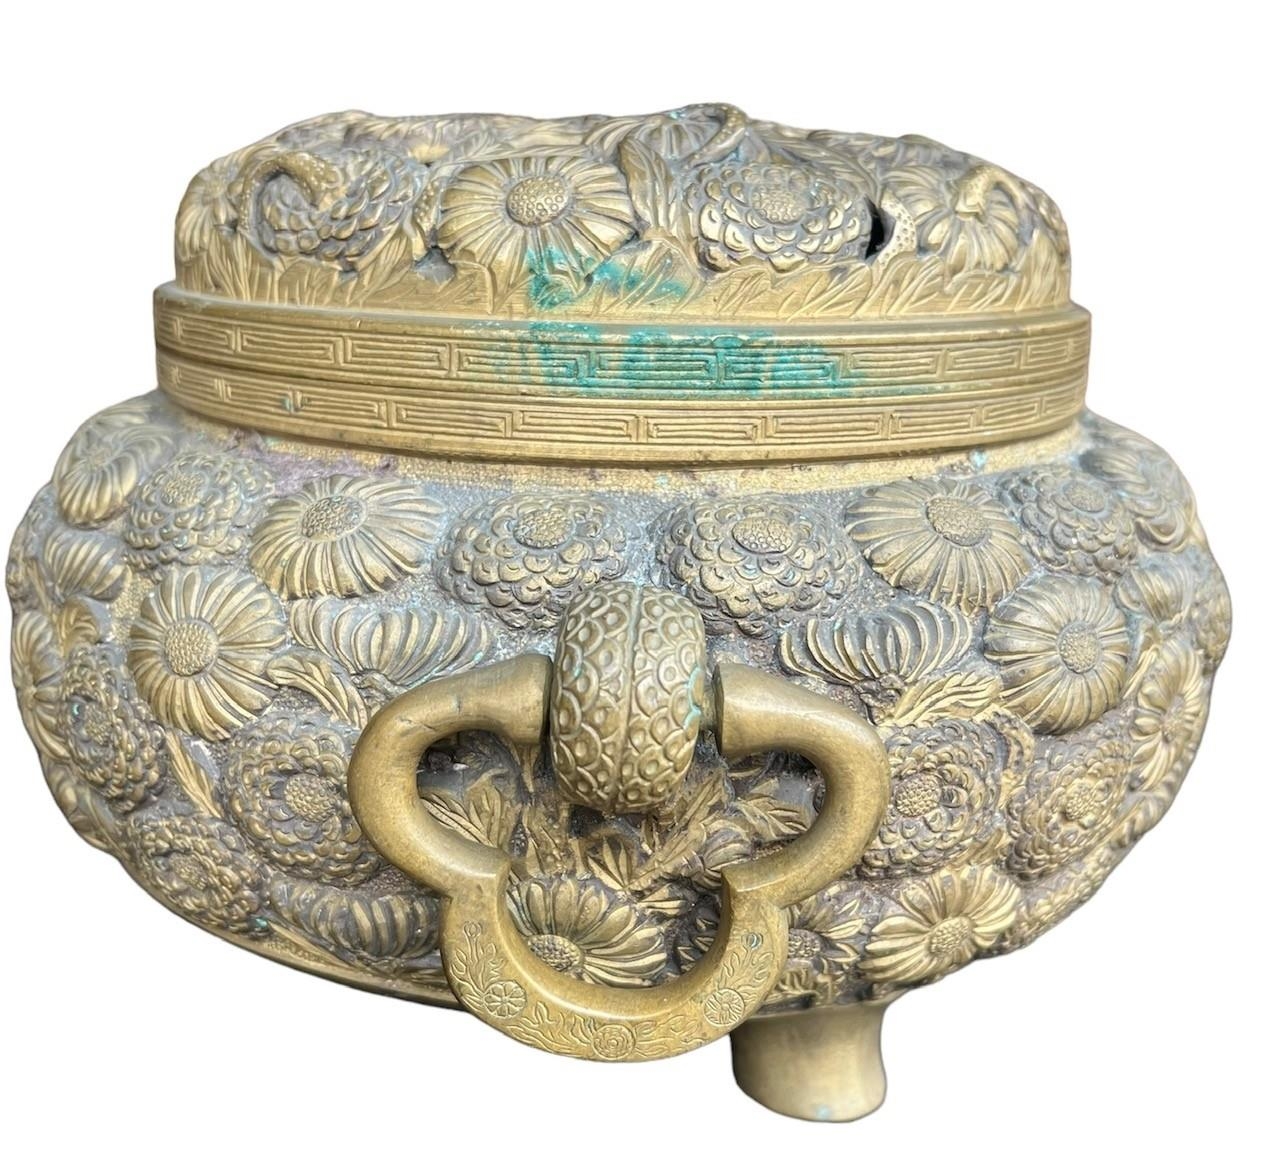 A LARGE JAPANESE MEIJI PERIOD BRONZE KORO AND COVER Decorated with sixteenth petal chrysanthemum - Image 3 of 8